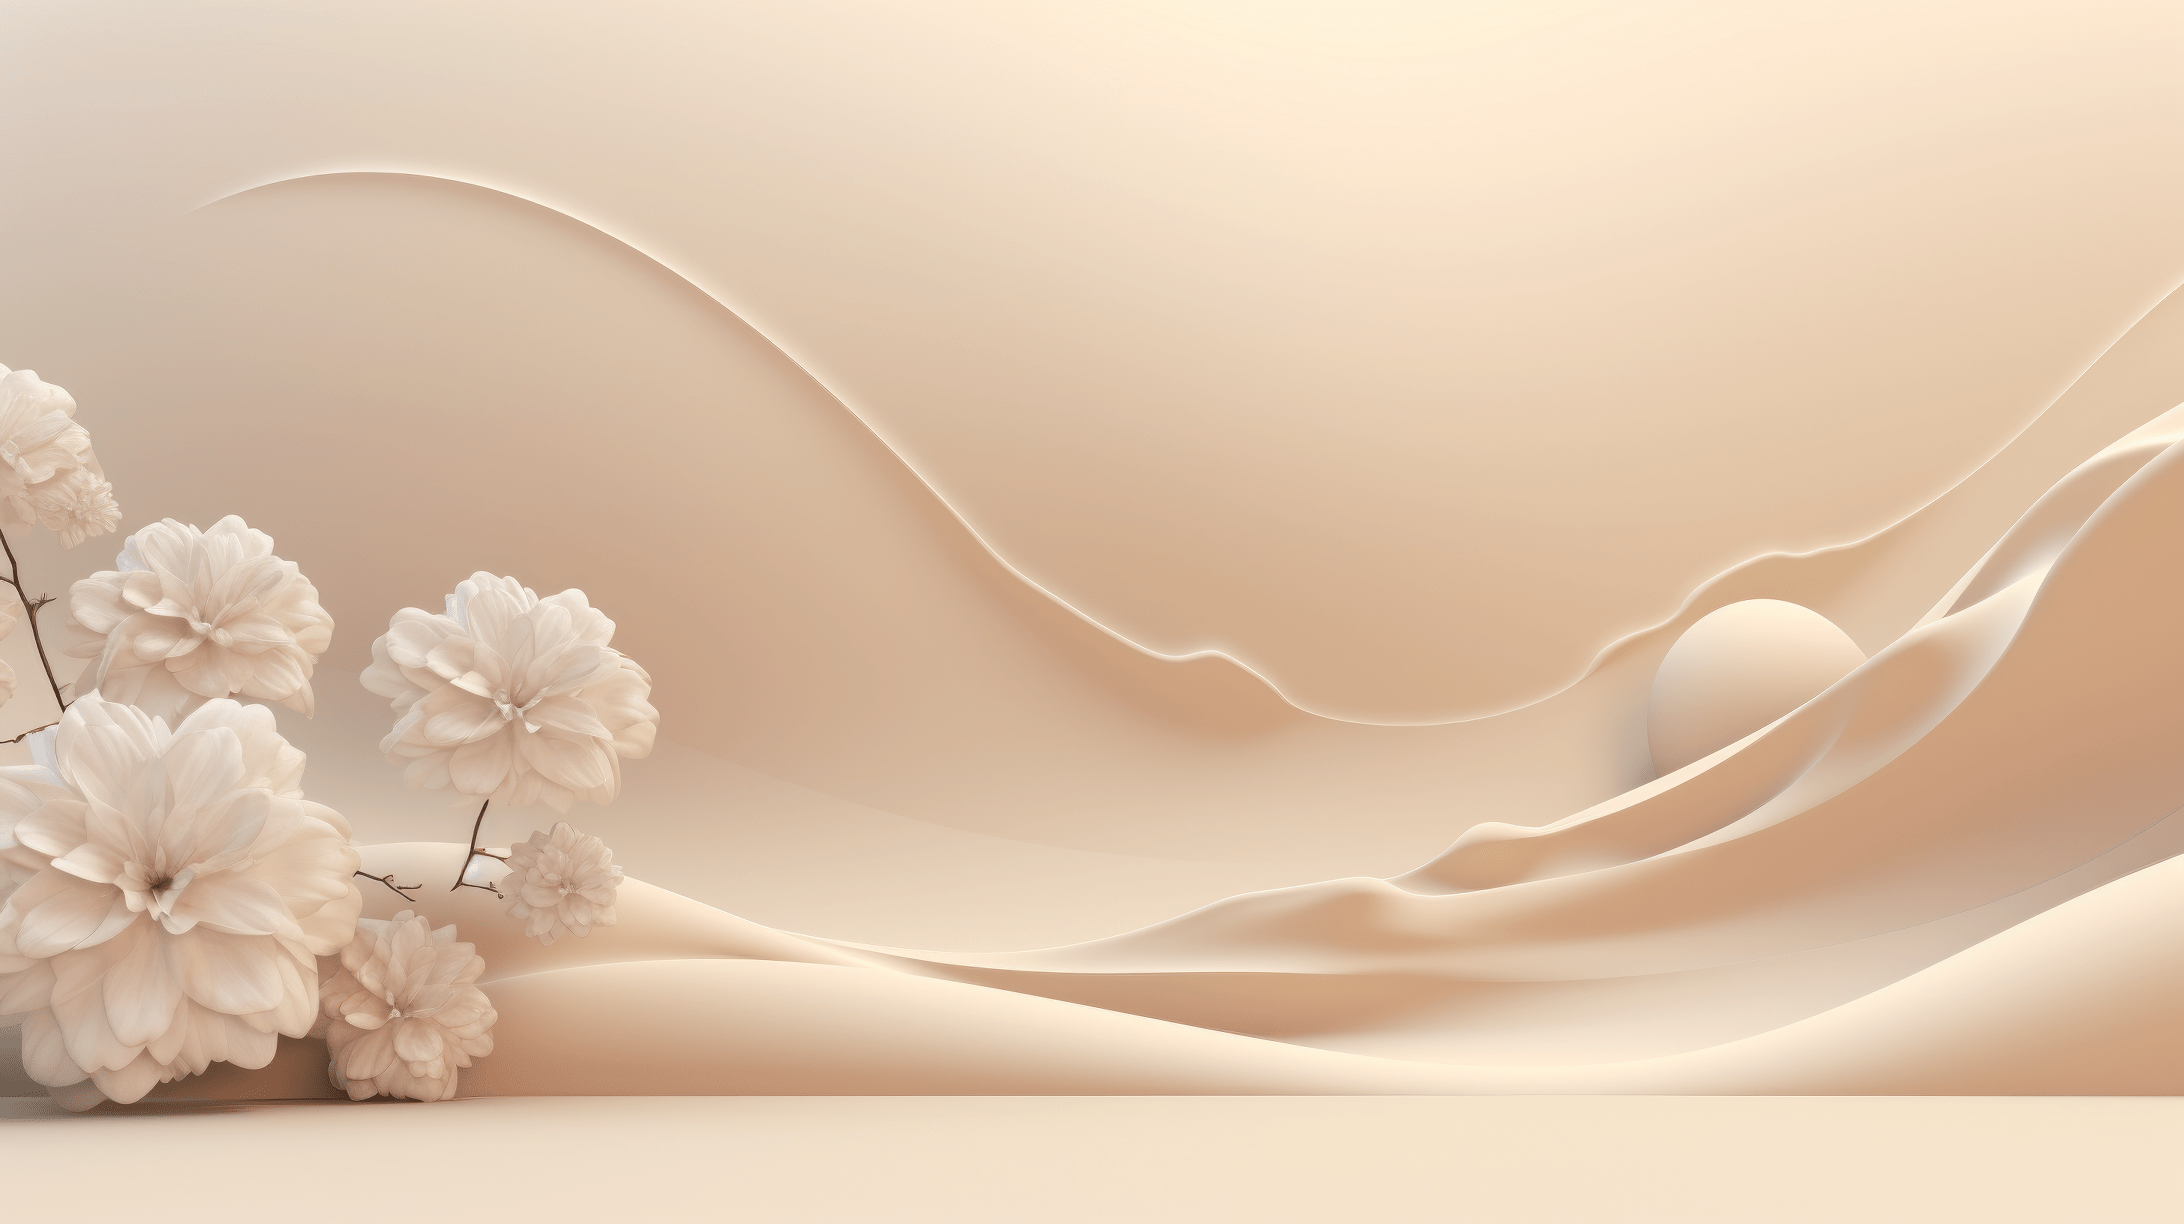 A 3D rendering of a beige landscape with flowers and flowing fabric - Desktop, Windows 10, design, colorful